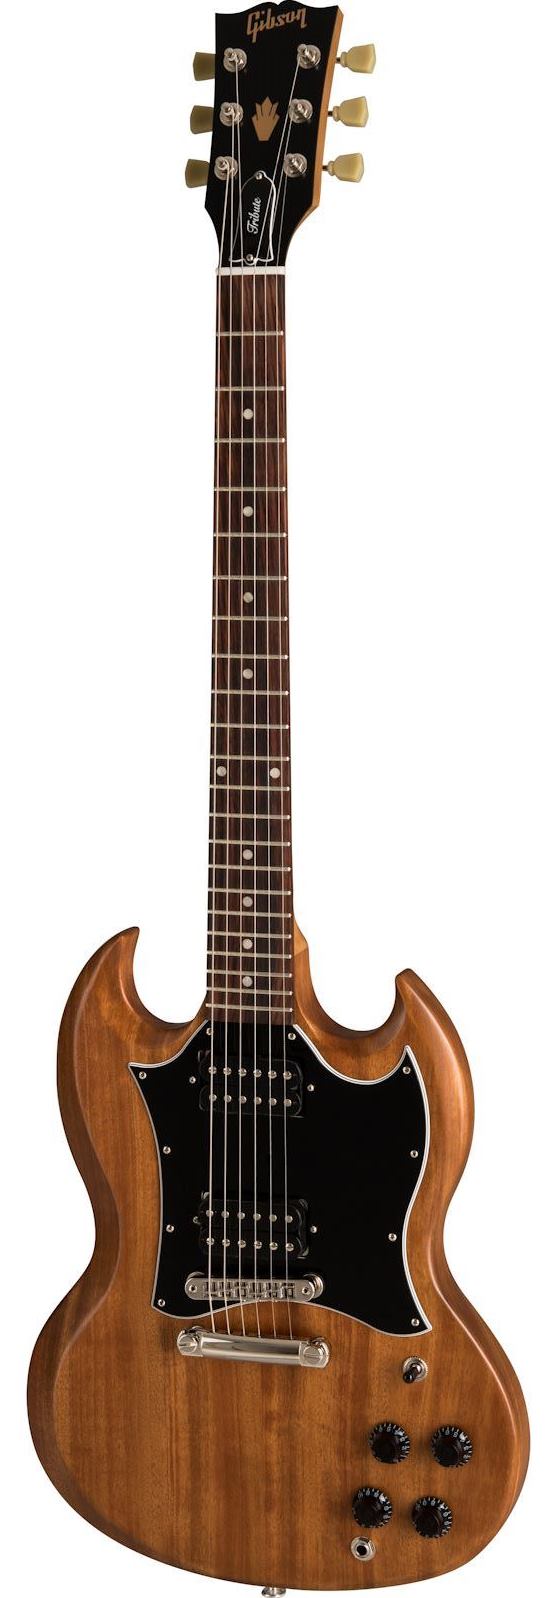 GIBSON 2019 SG TRIBUTE NATURAL WALNUT